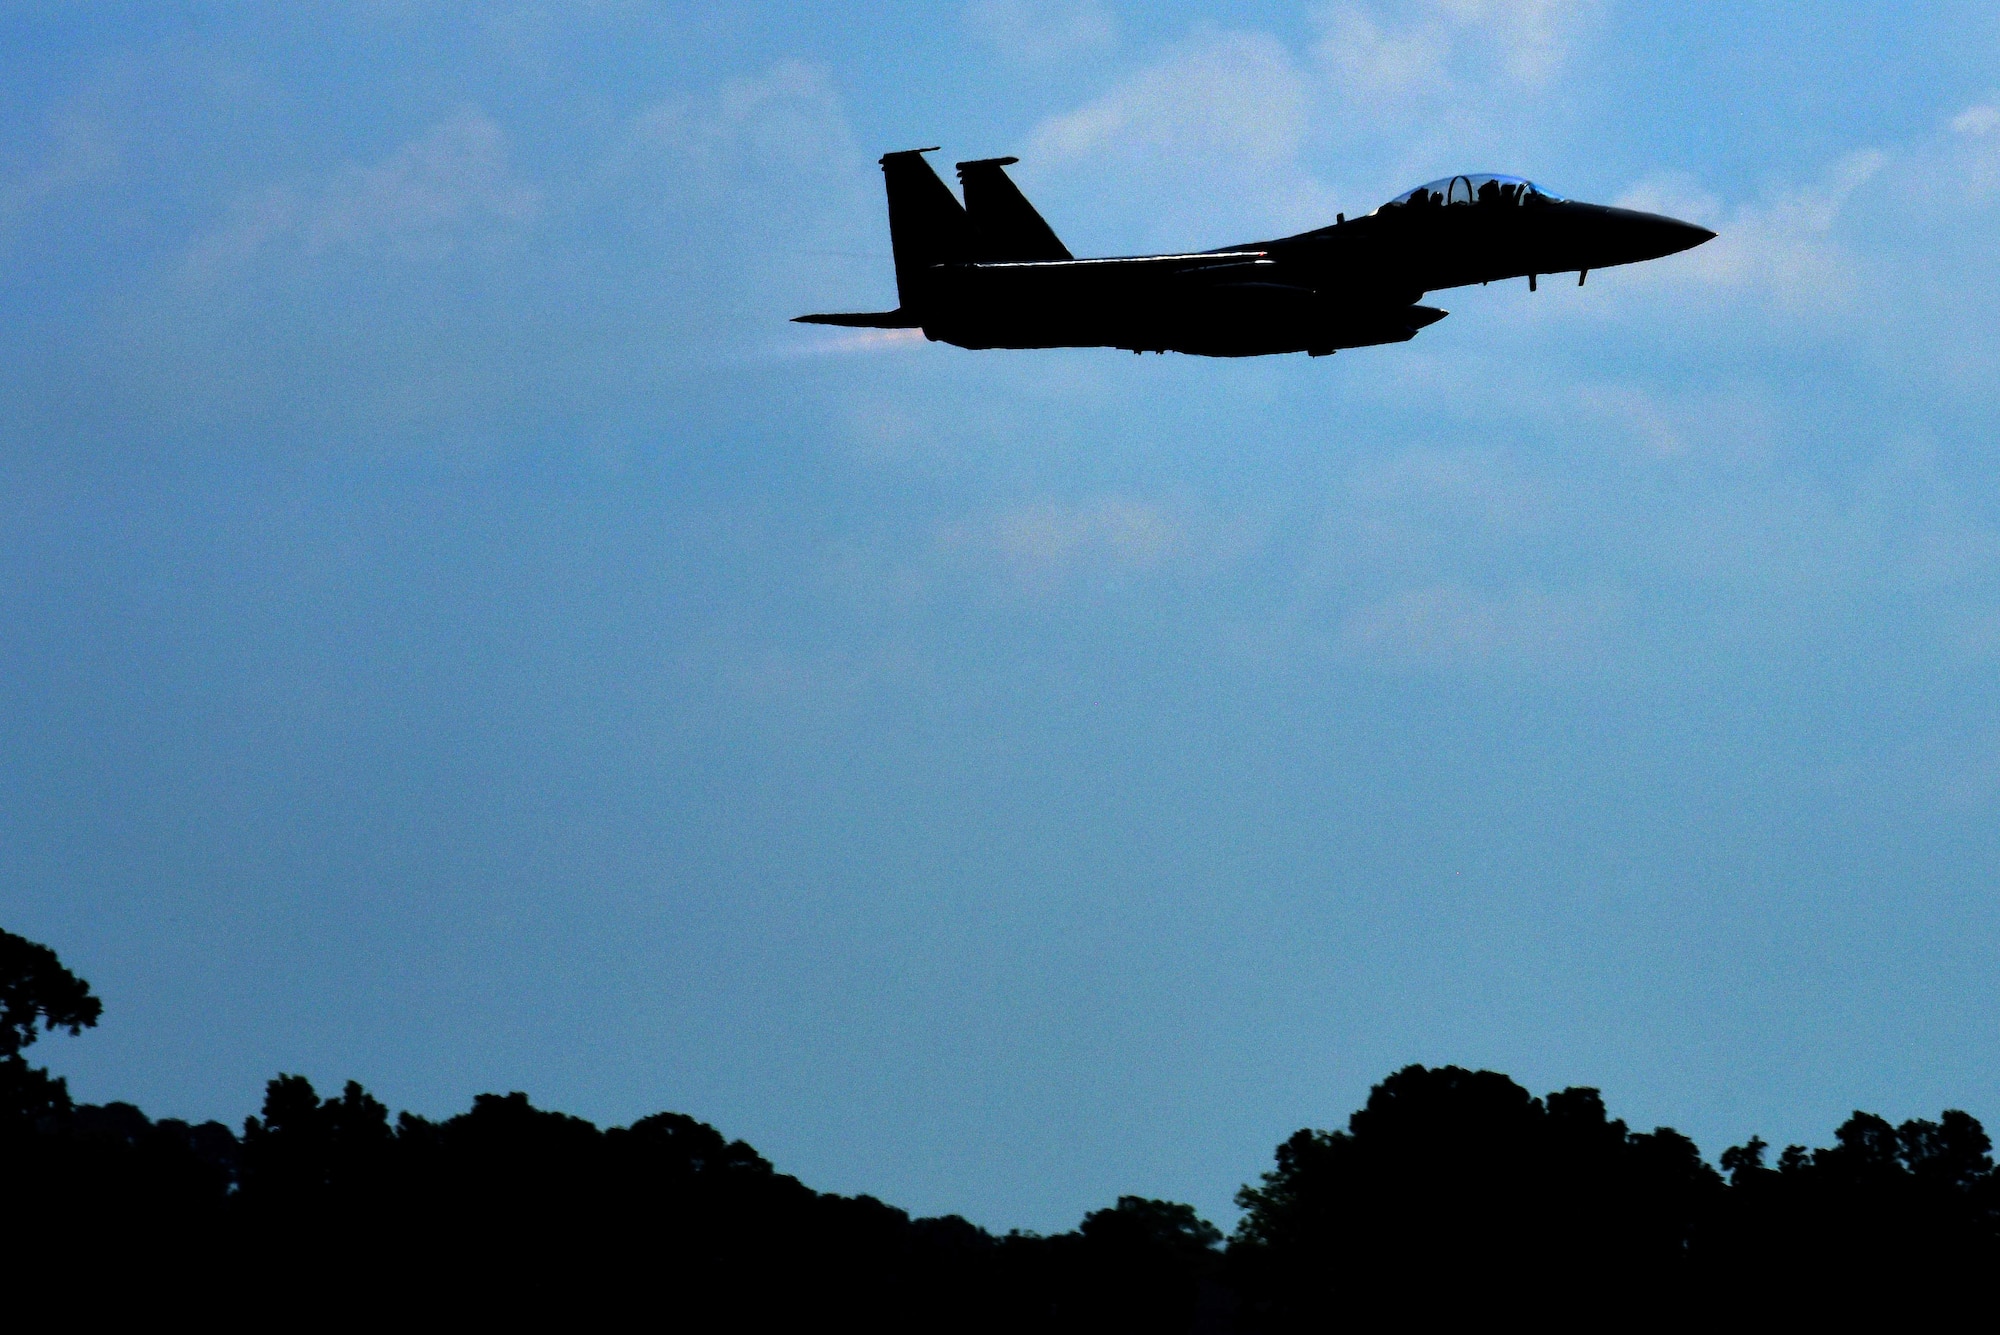 An F-15E Strike Eagle soars through the air during Exercise Thunderdome 17-02, July 21, 2017, at Seymour Johnson Air Force Base, North Carolina. The scenario required the 4 FW to prepare and deploy more than 400 Airmen and more than 300 tons of cargo and equipment needed to provide F-15E capability and mission support to simulated regional commanders. (U.S. Air Force photo by Senior Airman Ashley Maldonado)